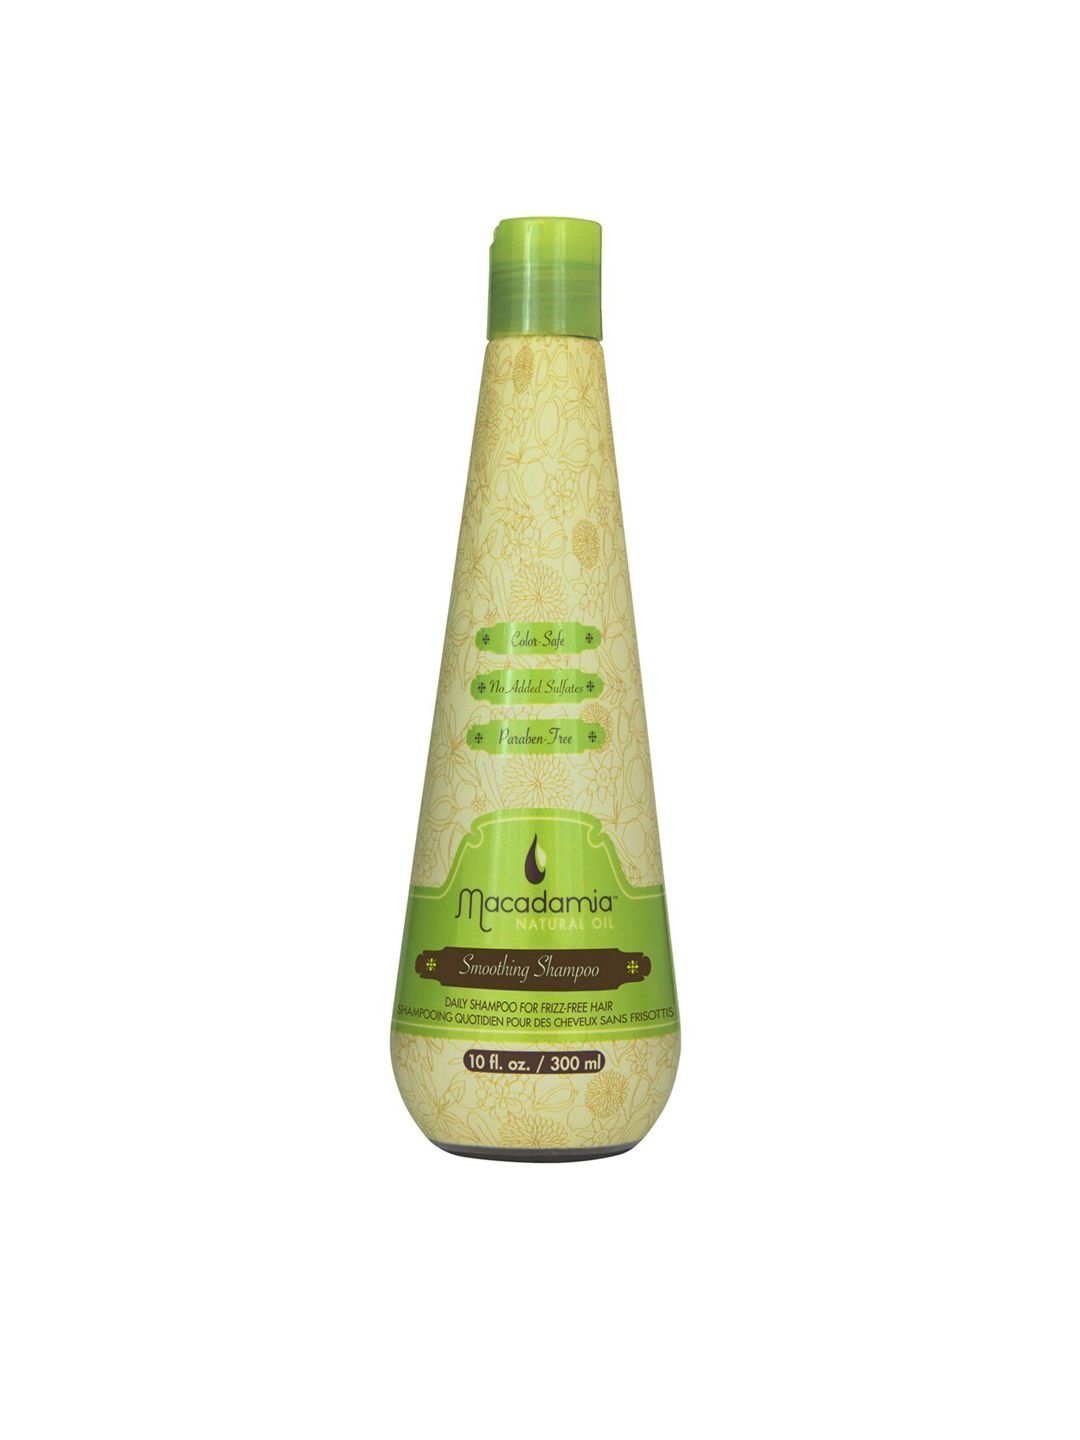 Macadamia Natural Oil Smoothing Shampoo 300 ML Price in India